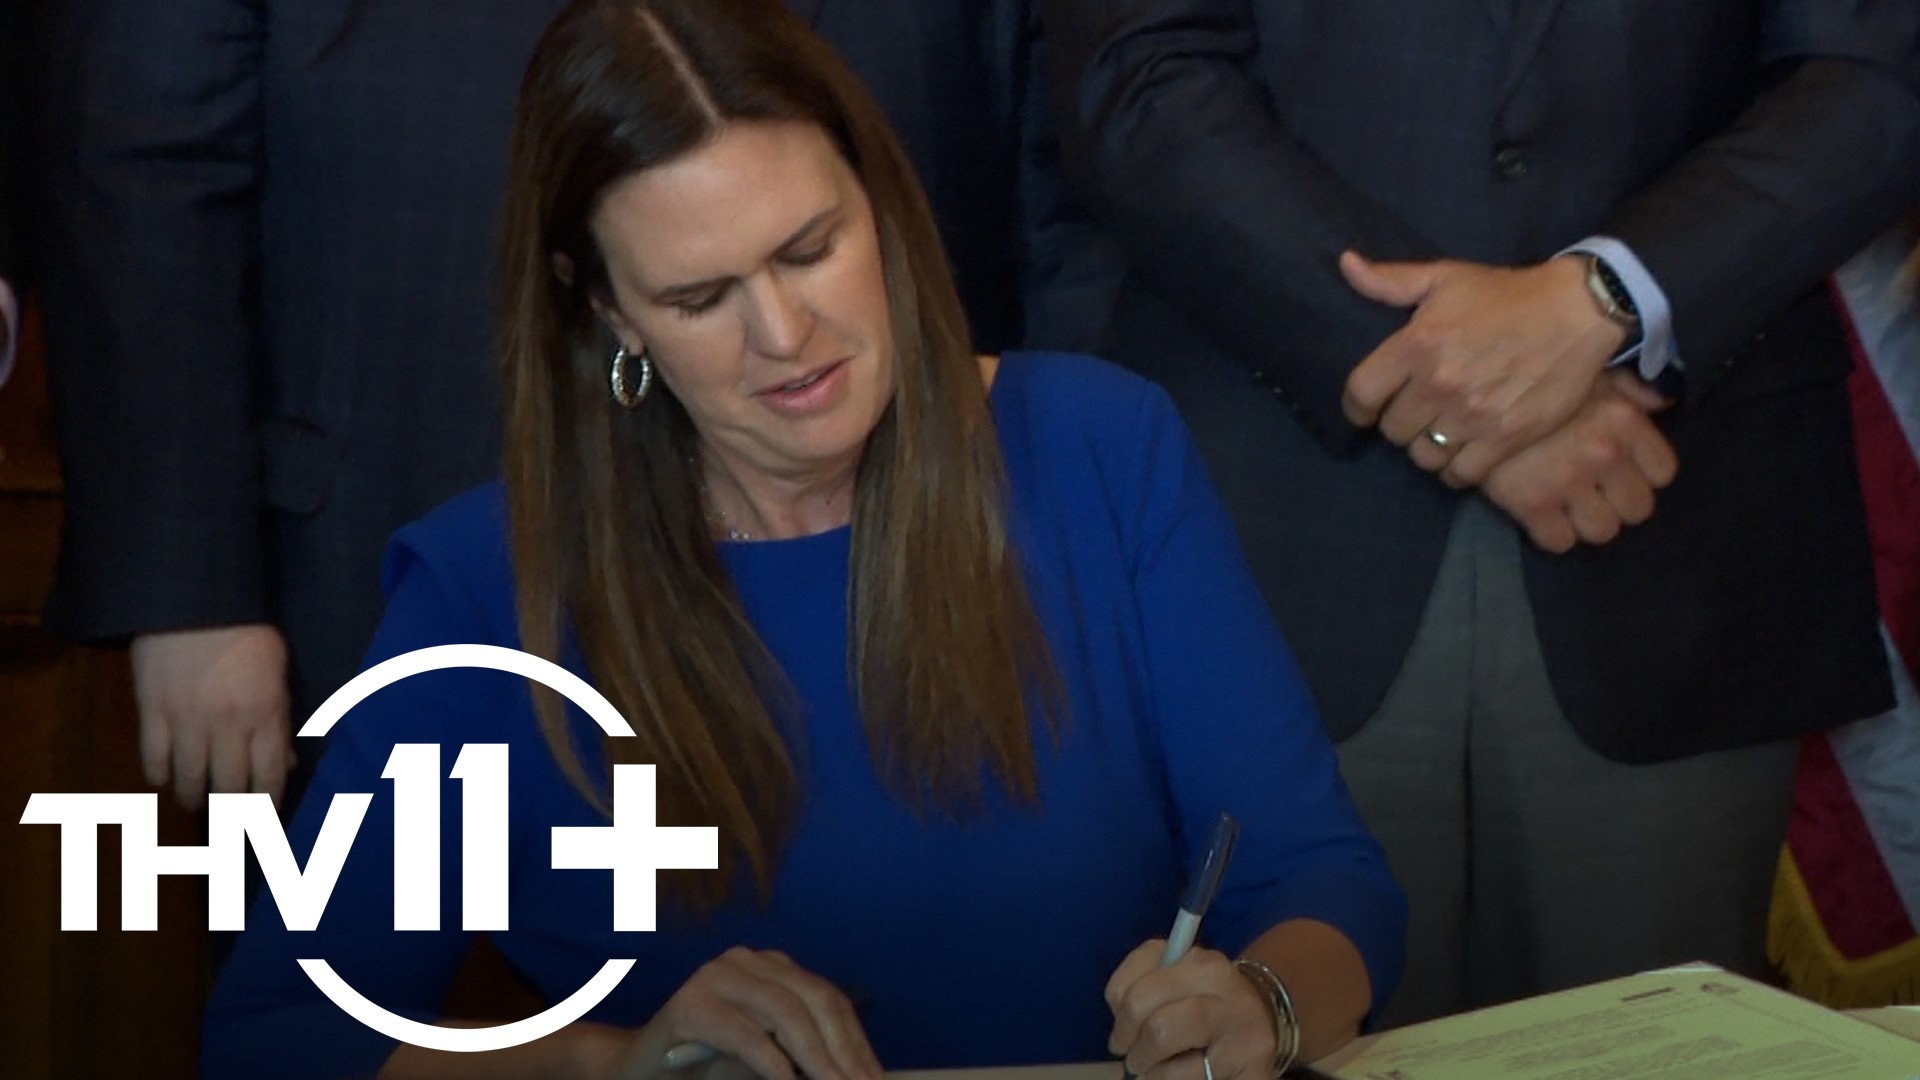 Gov. Sarah Huckabee Sanders has signed into law proposals that change access to government records, COVID-19 mandates, and tax cuts for Arkansans.